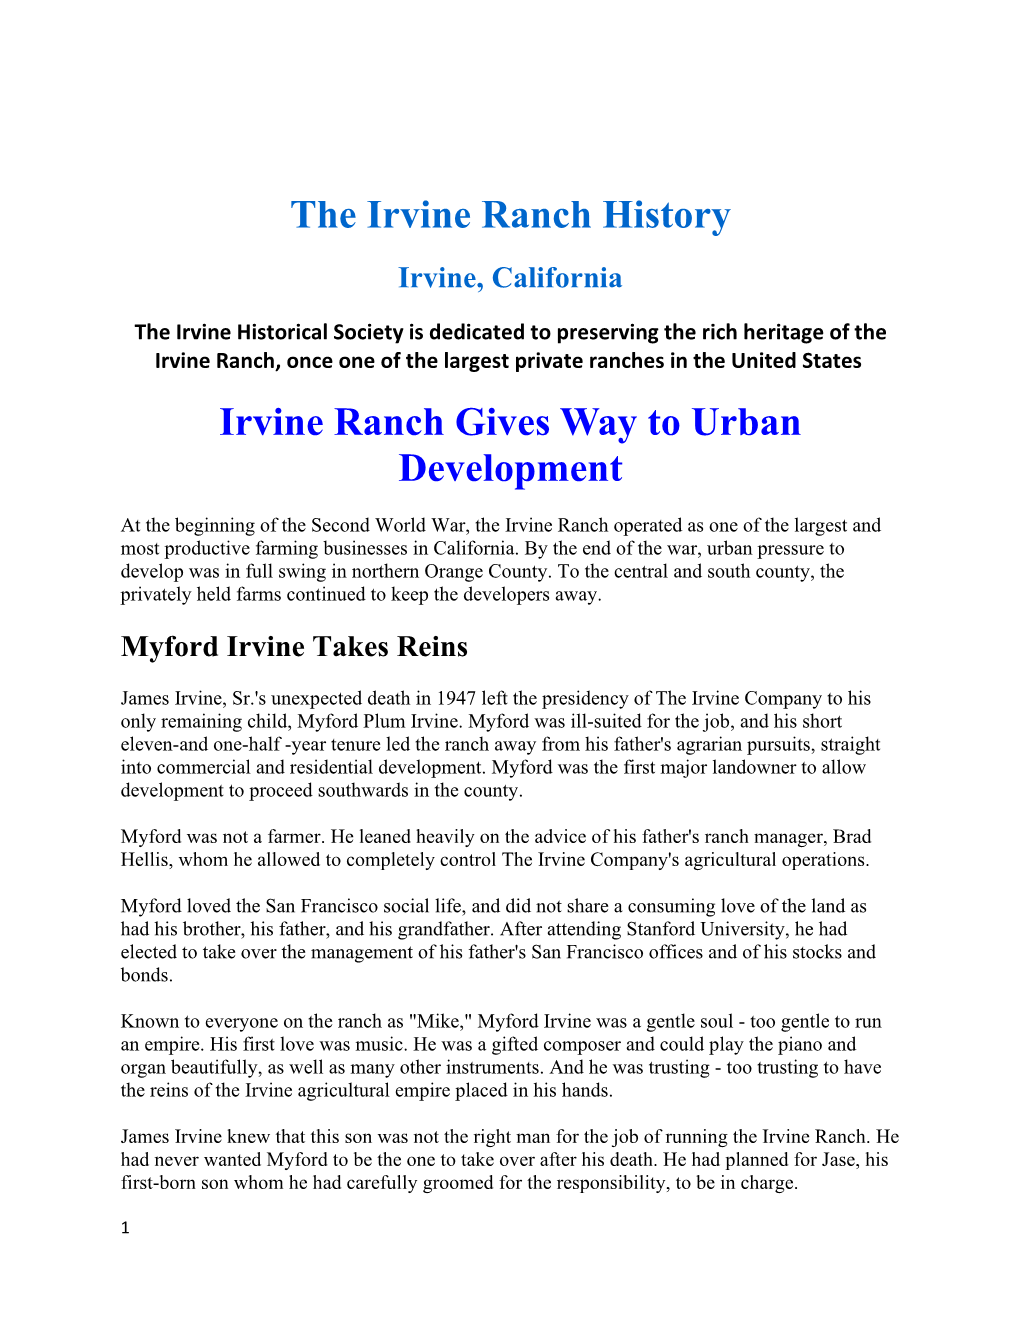 The Irvine Ranch History Irvine Ranch Gives Way to Urban Development